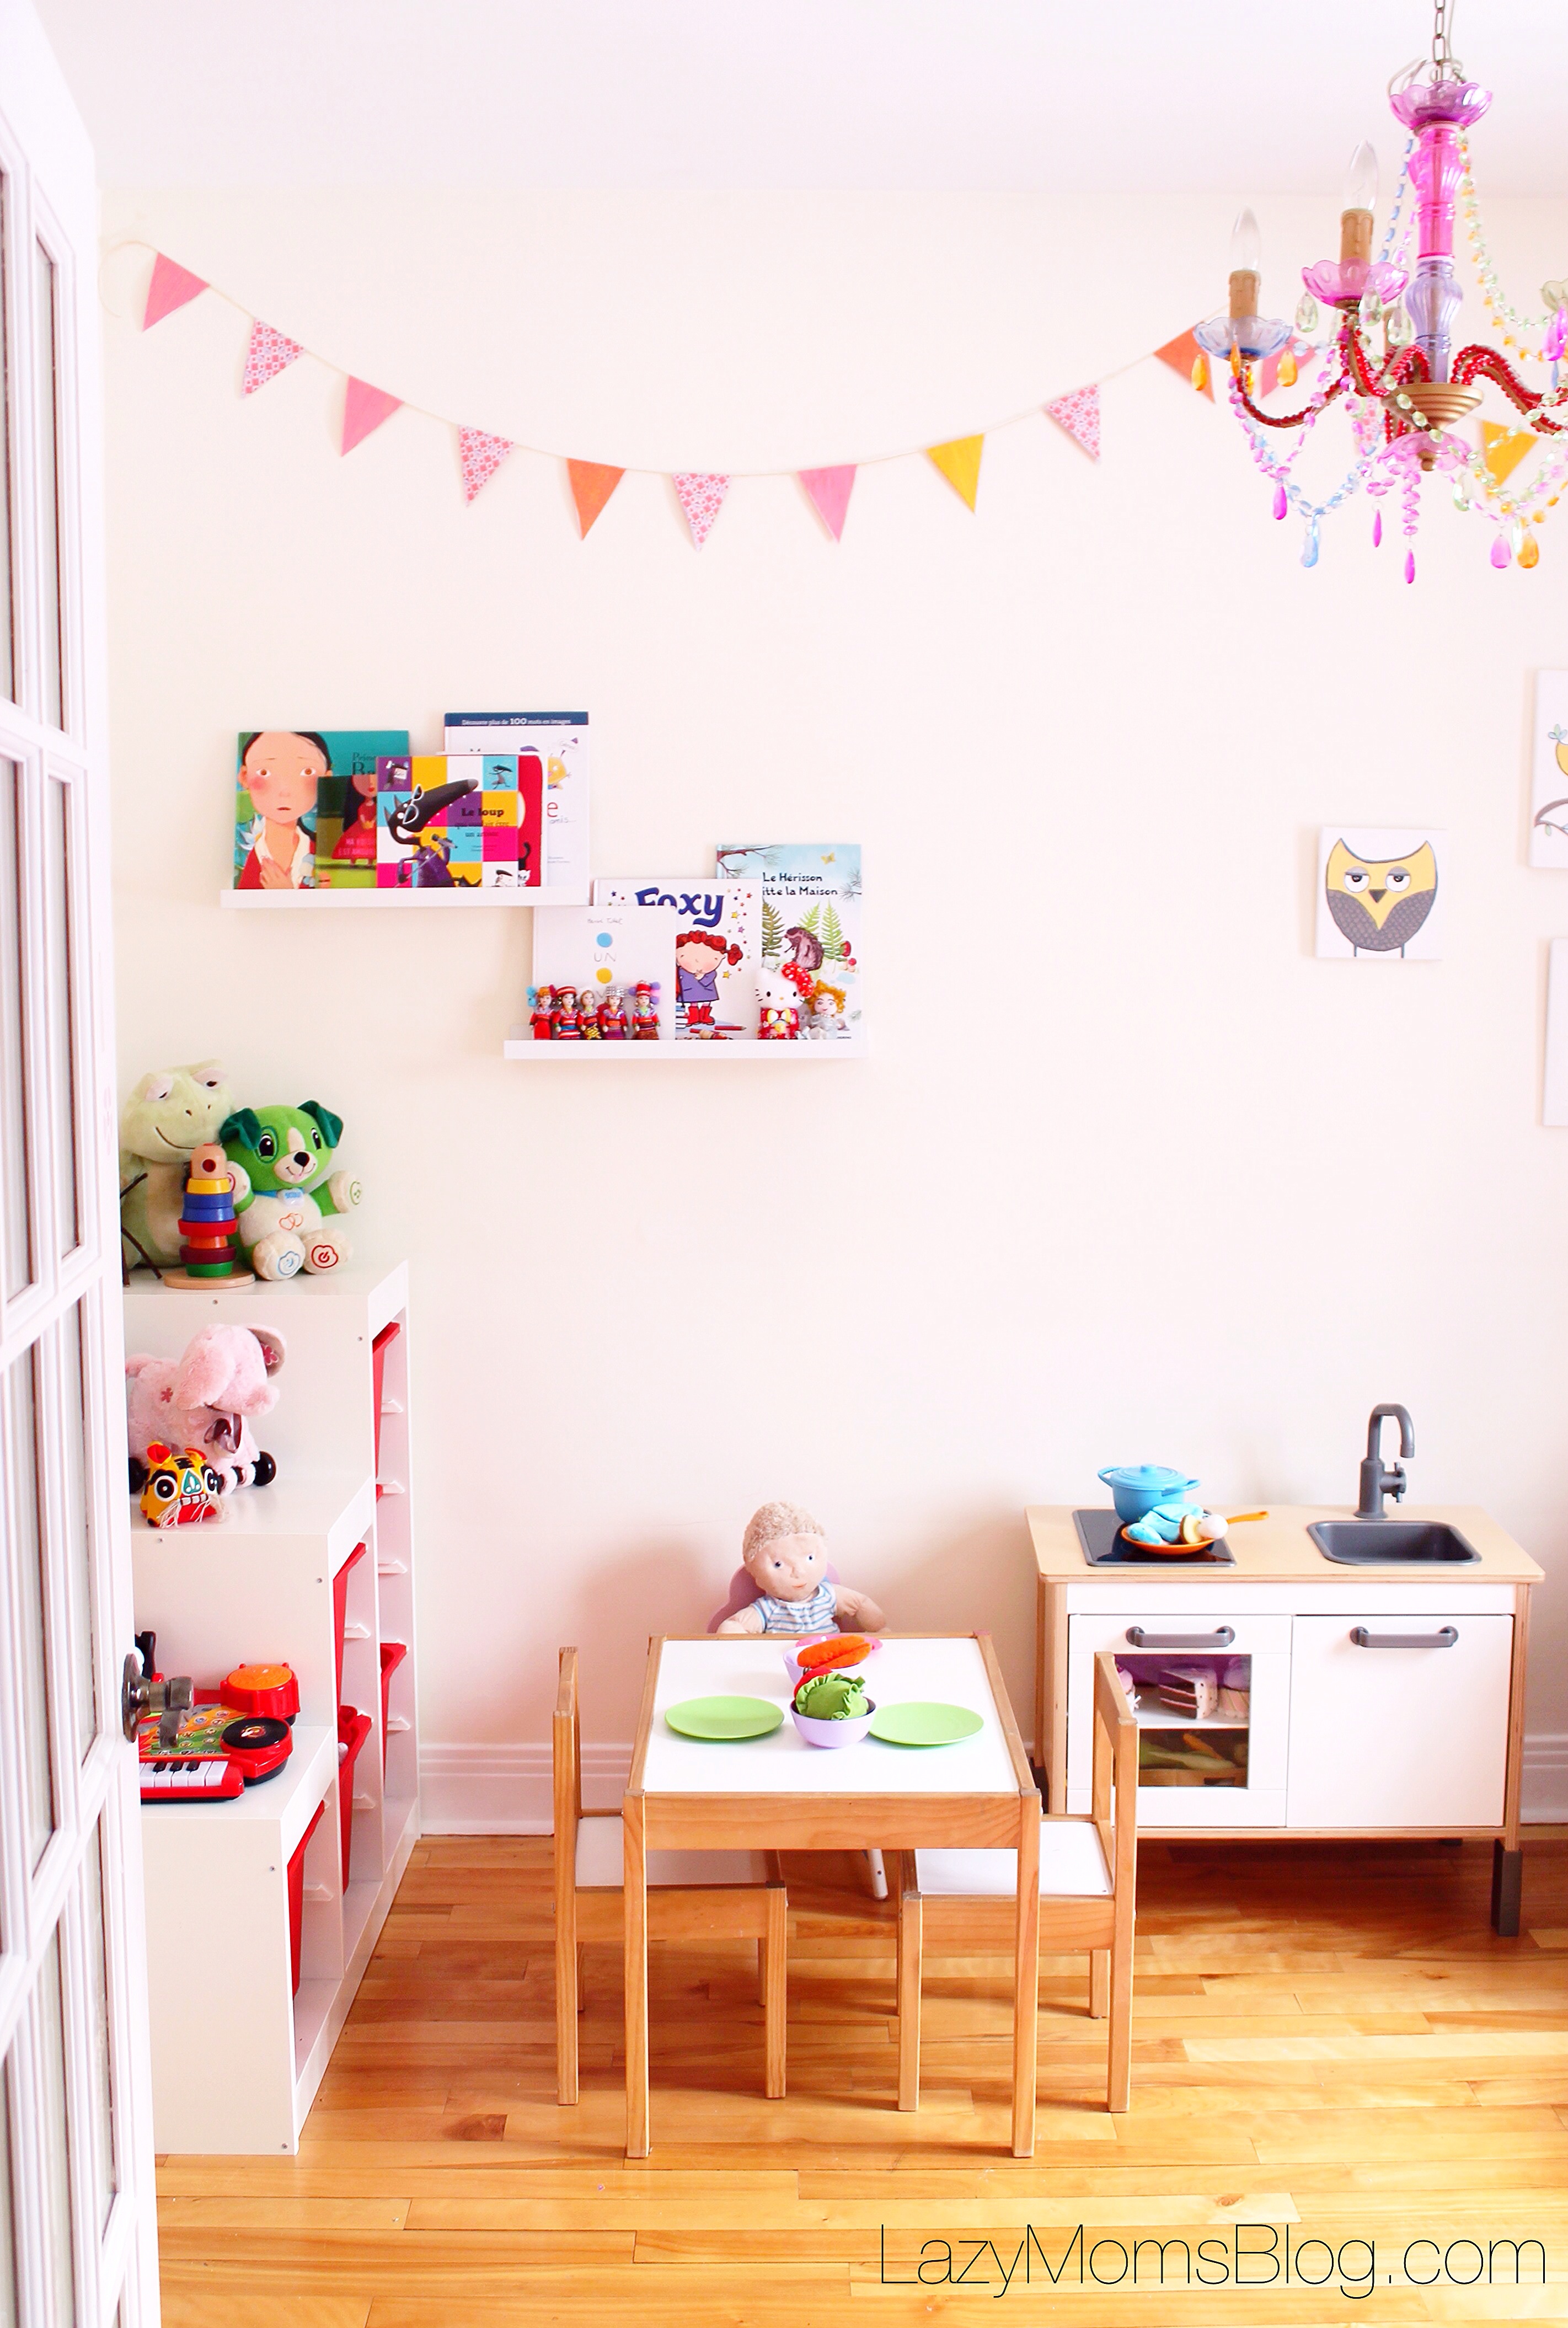 Tried tips and tricks for encouraging independent play #parenting #playroom  